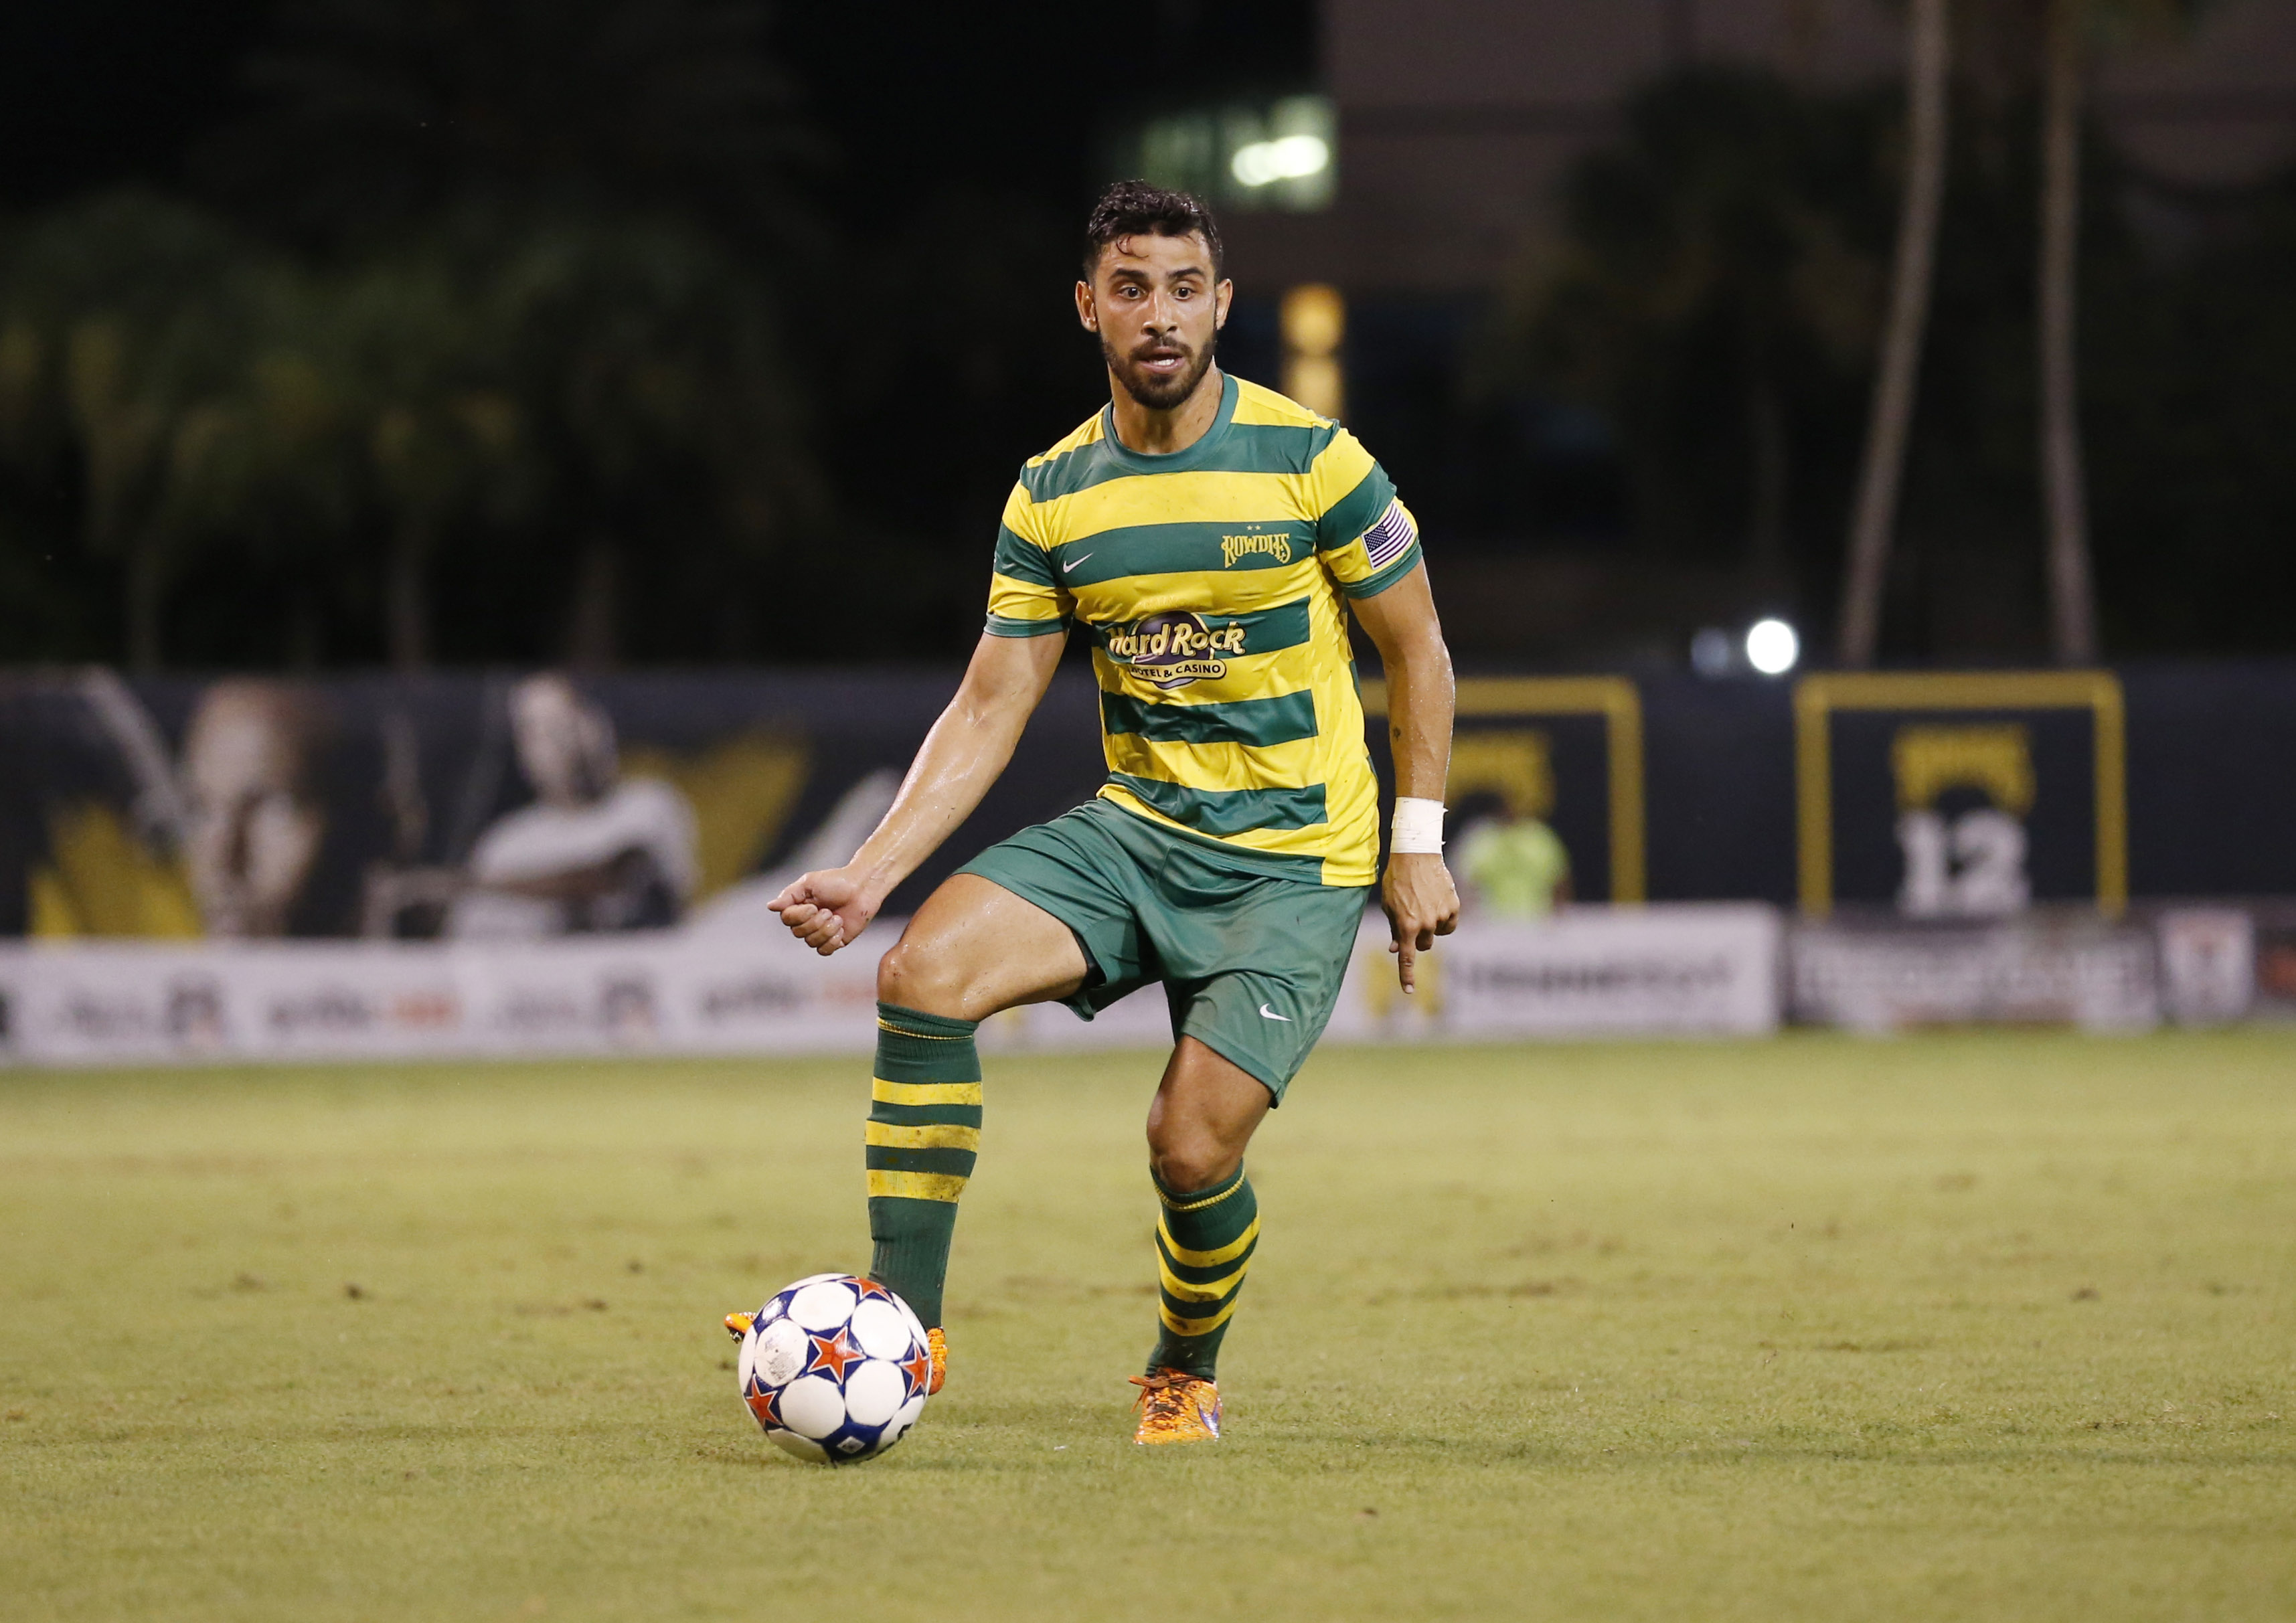 JULY 25, 2015 - ST. PETERSBURG, FLORIDA: The Tampa Bay Rowdies match against the Fort Lauderdale Strikers at Al Lang Field on Saturday July 25, 2015. The Rowdies lost the match 3-1. Photo by Matt May/Tampa Bay Rowdies